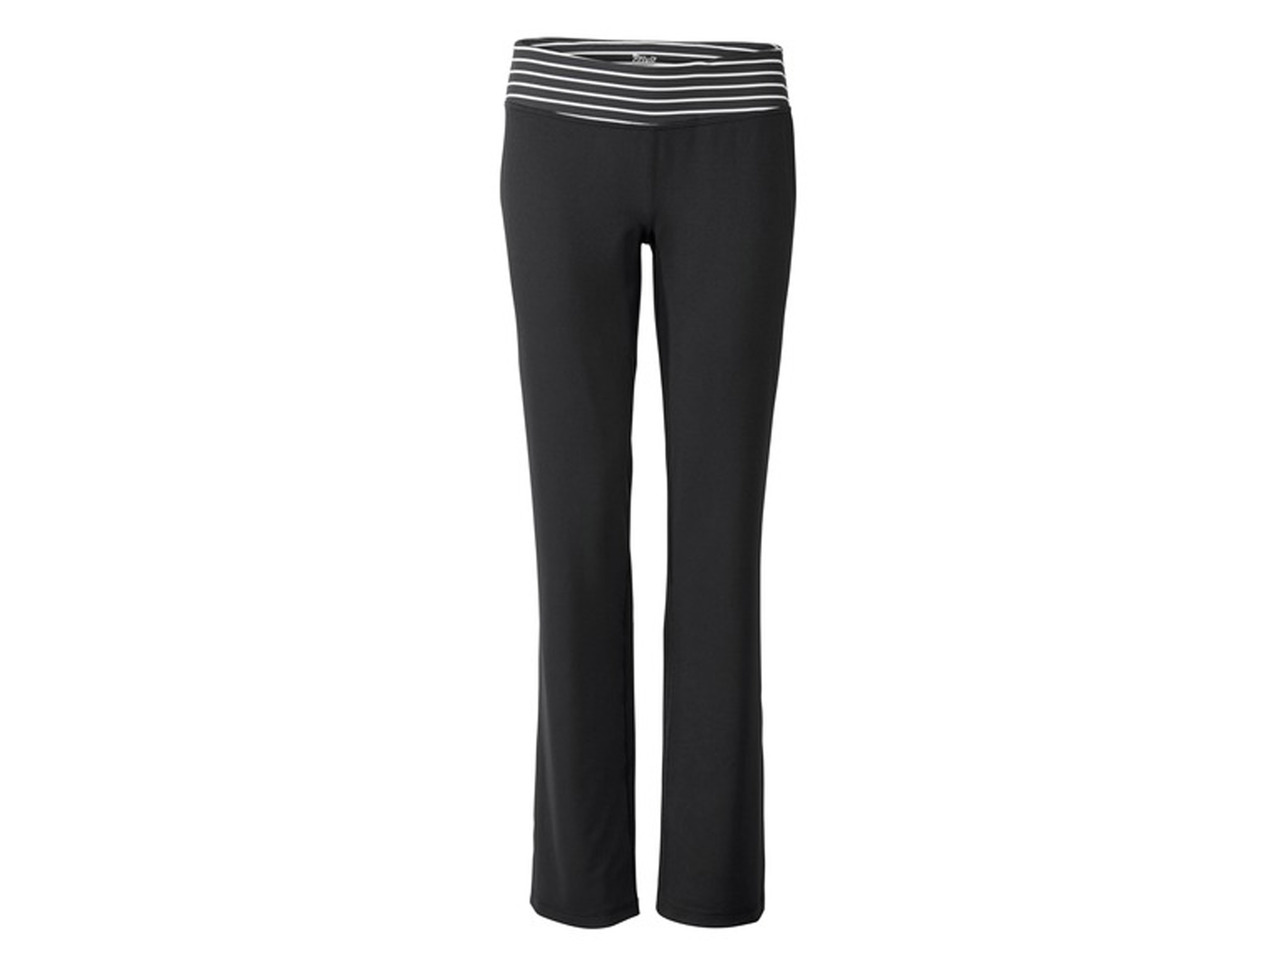 Ladies' Sports Trousers